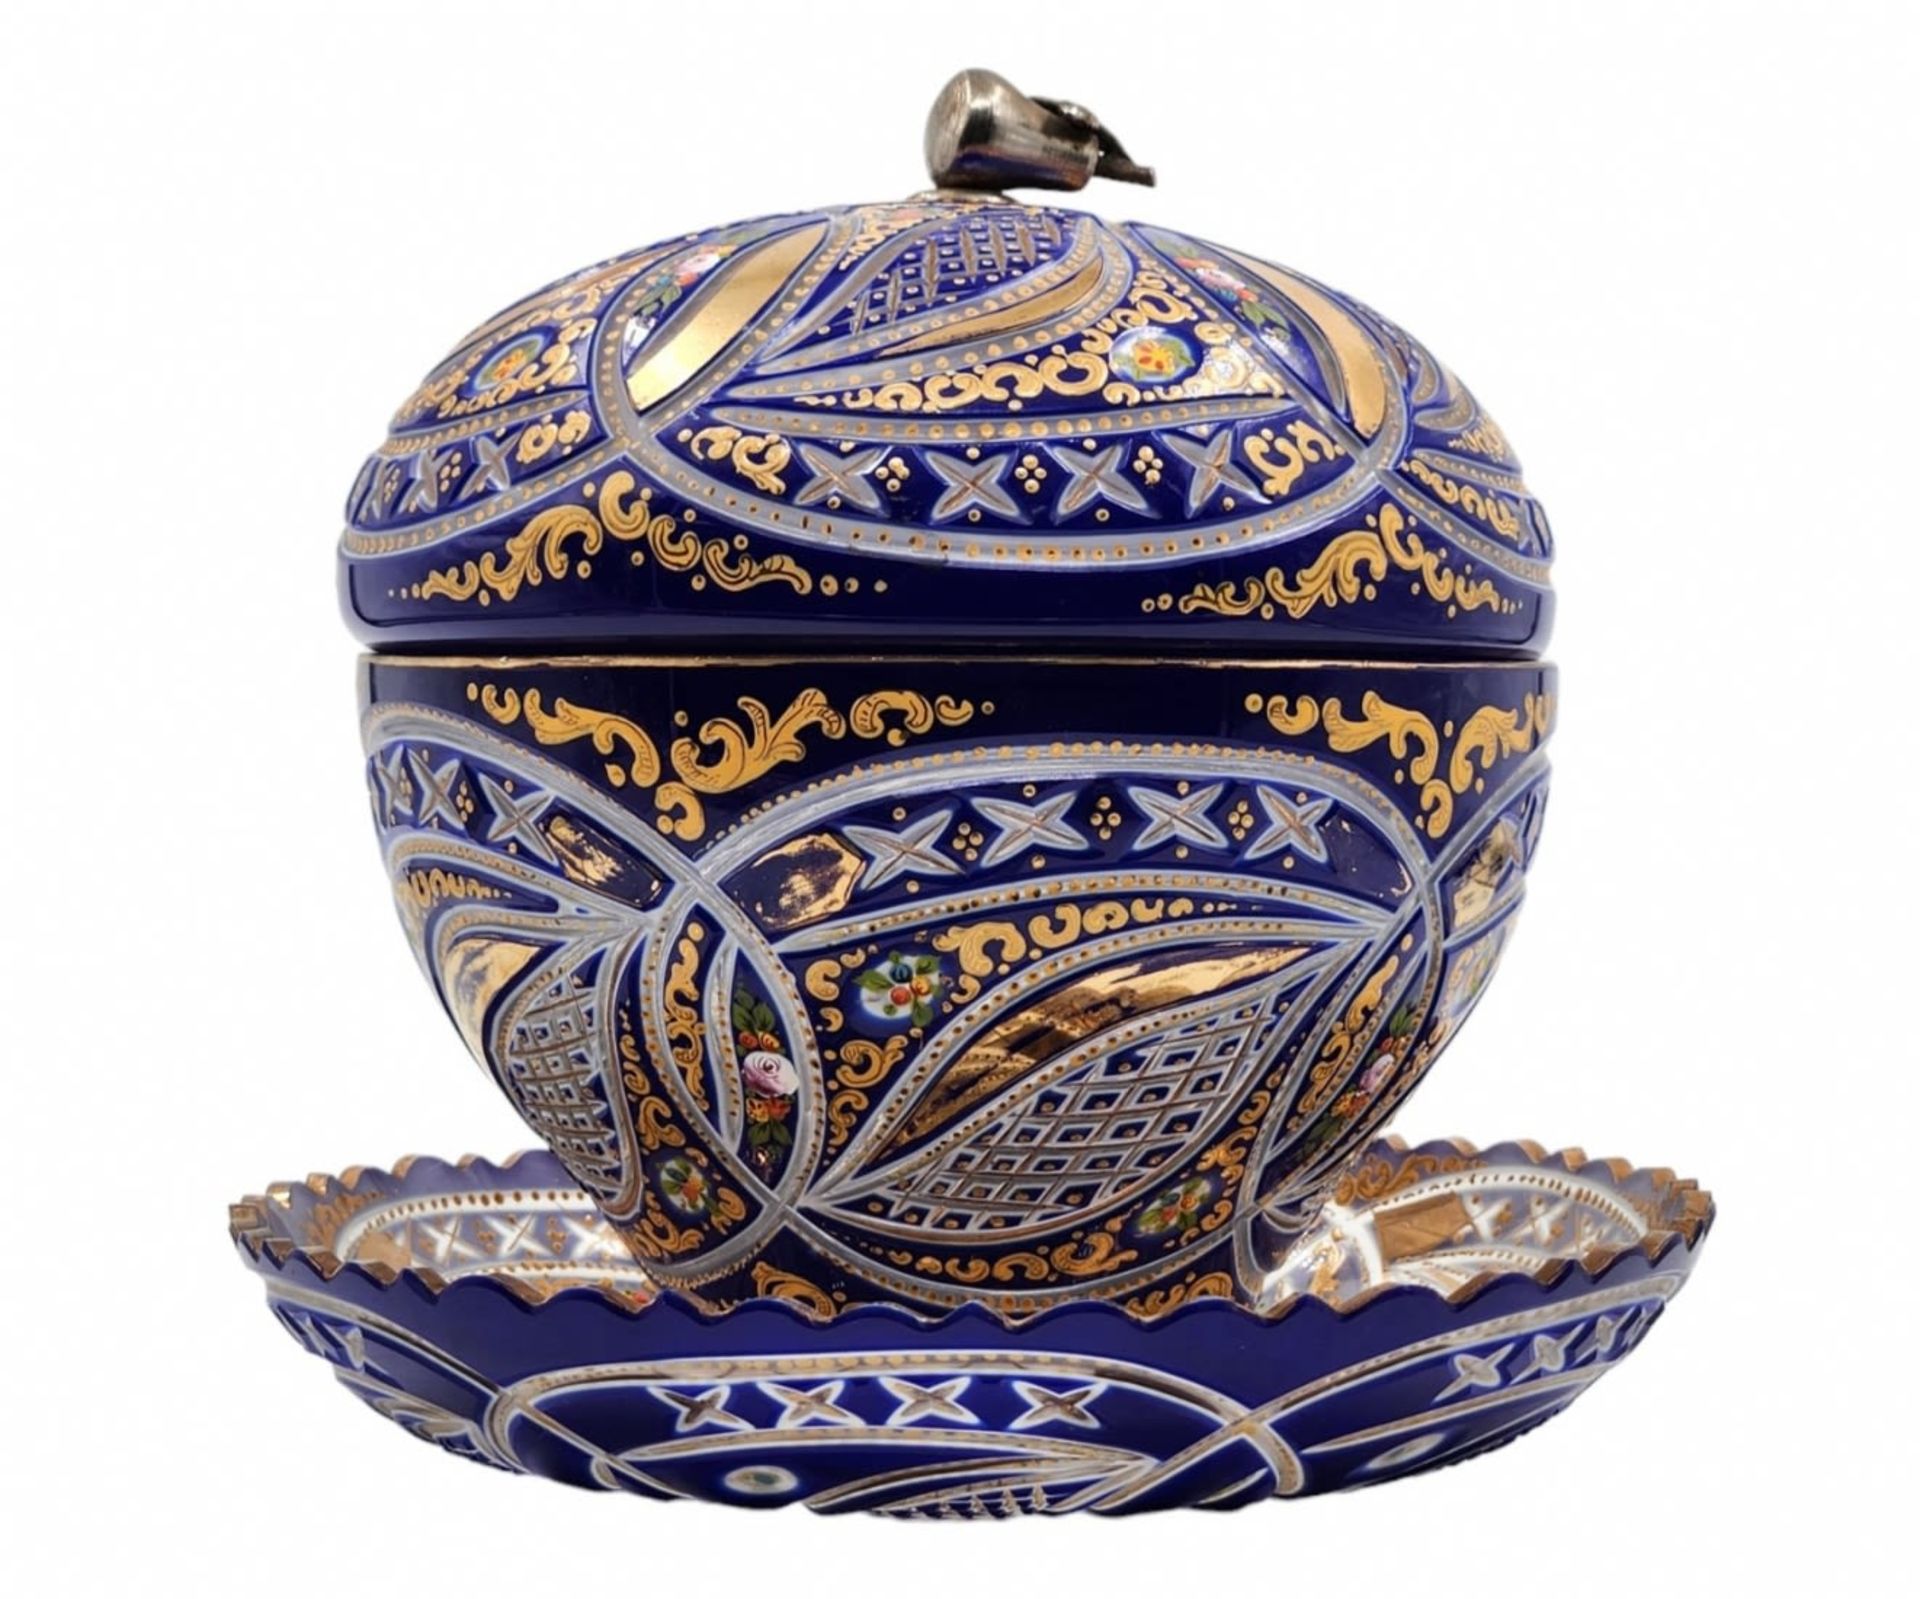 Ancient Bohemian vessel, a very high quality 19th century vessel created for the Ottoman market in